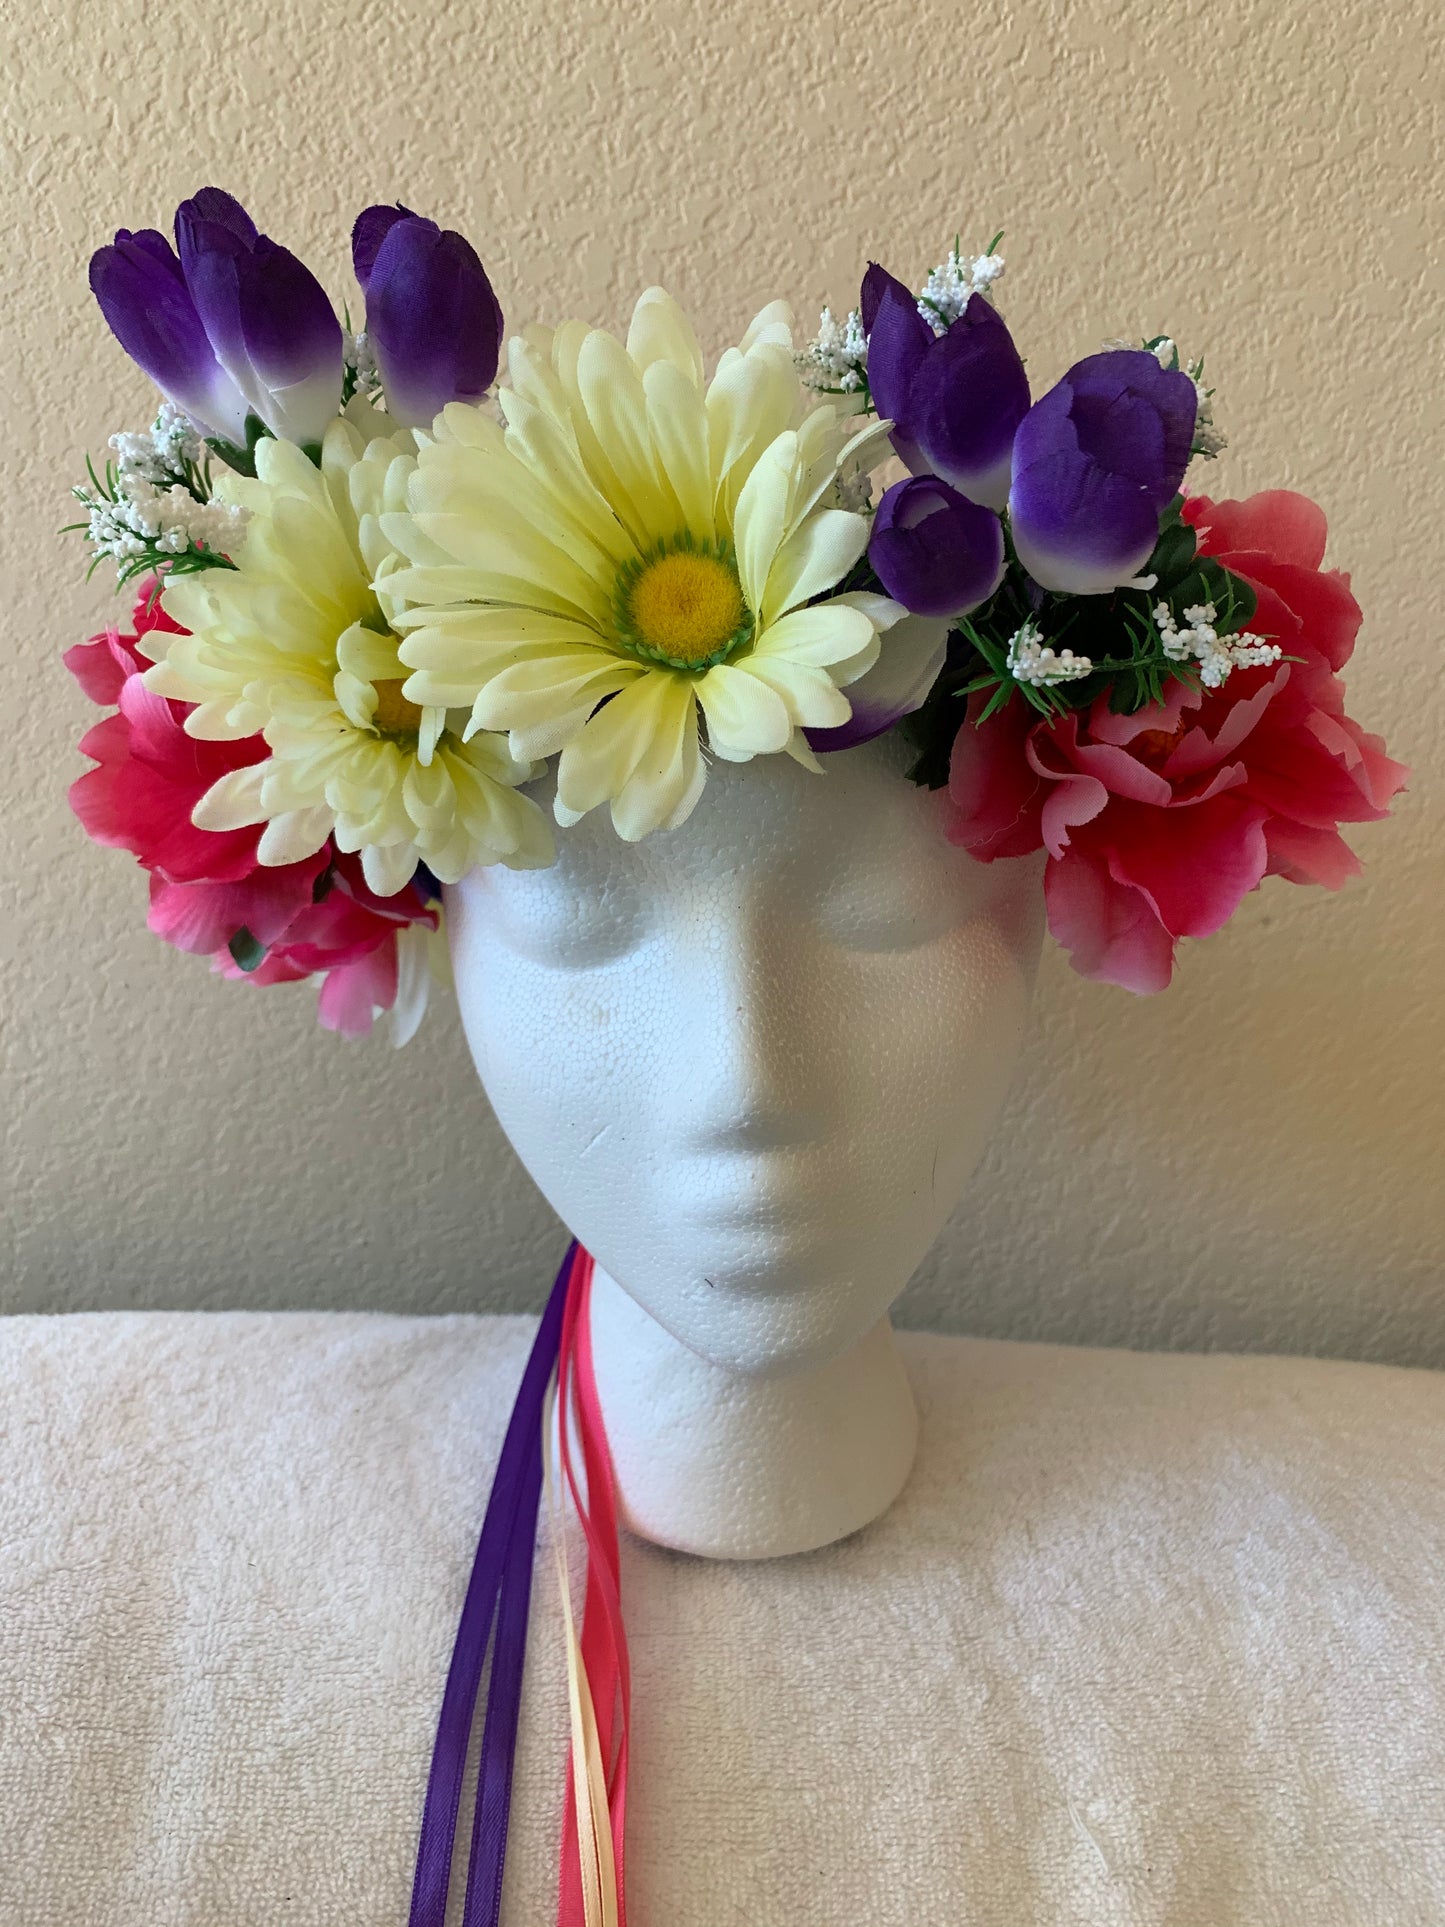 Large Wreath - Hot Pink, Pale Yellow, and Purple Flowers